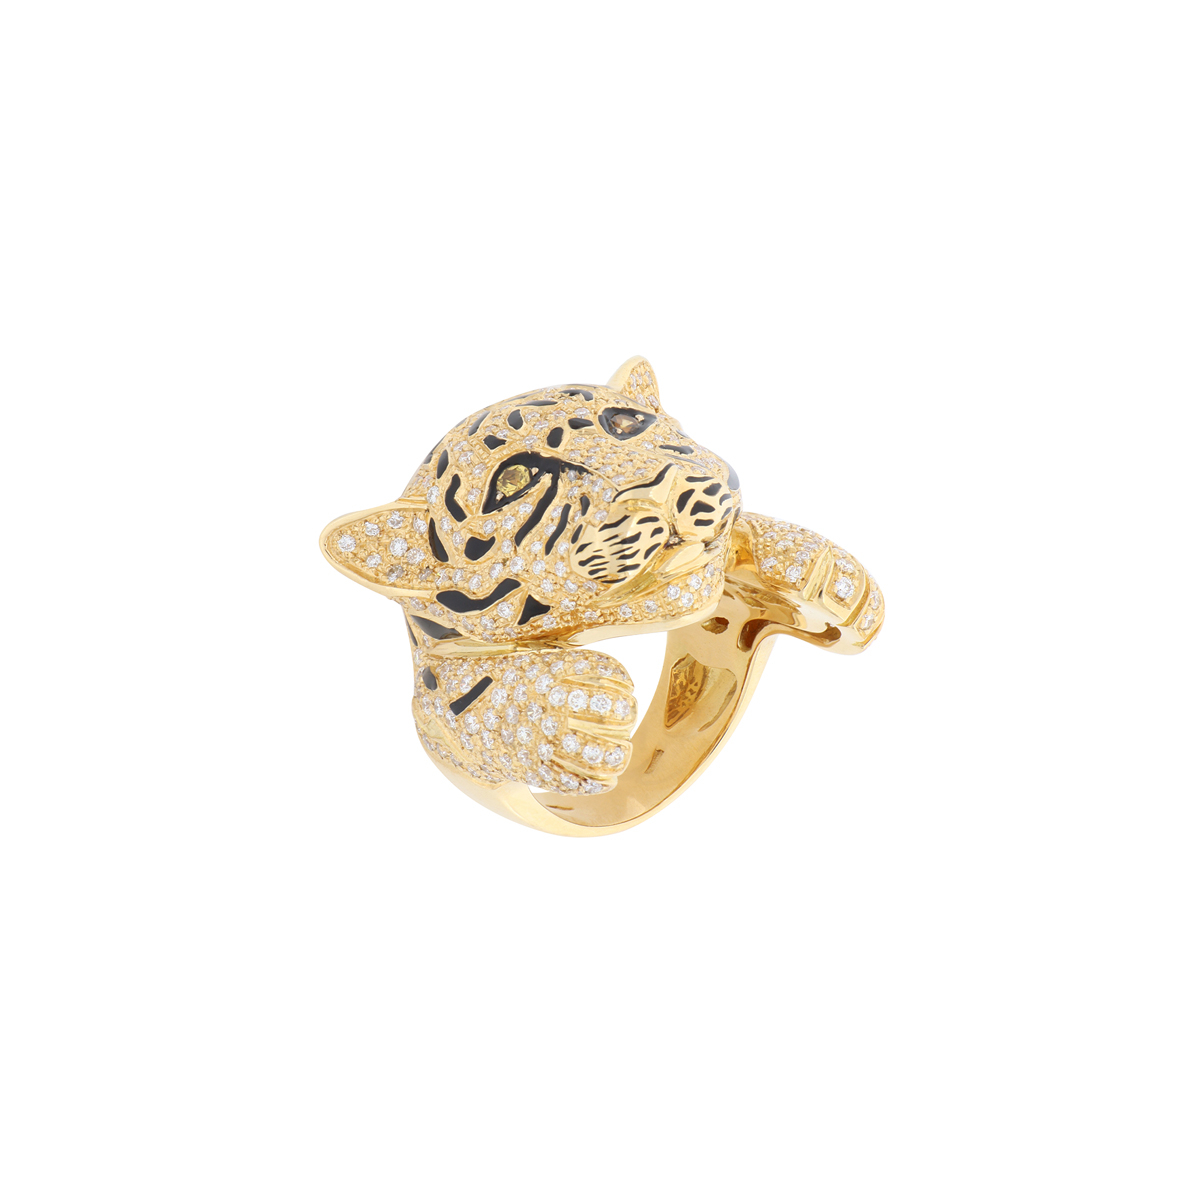 Tiger Design 18kt Yellow Gold Ring with White Diamonds & Yellow Sapphire